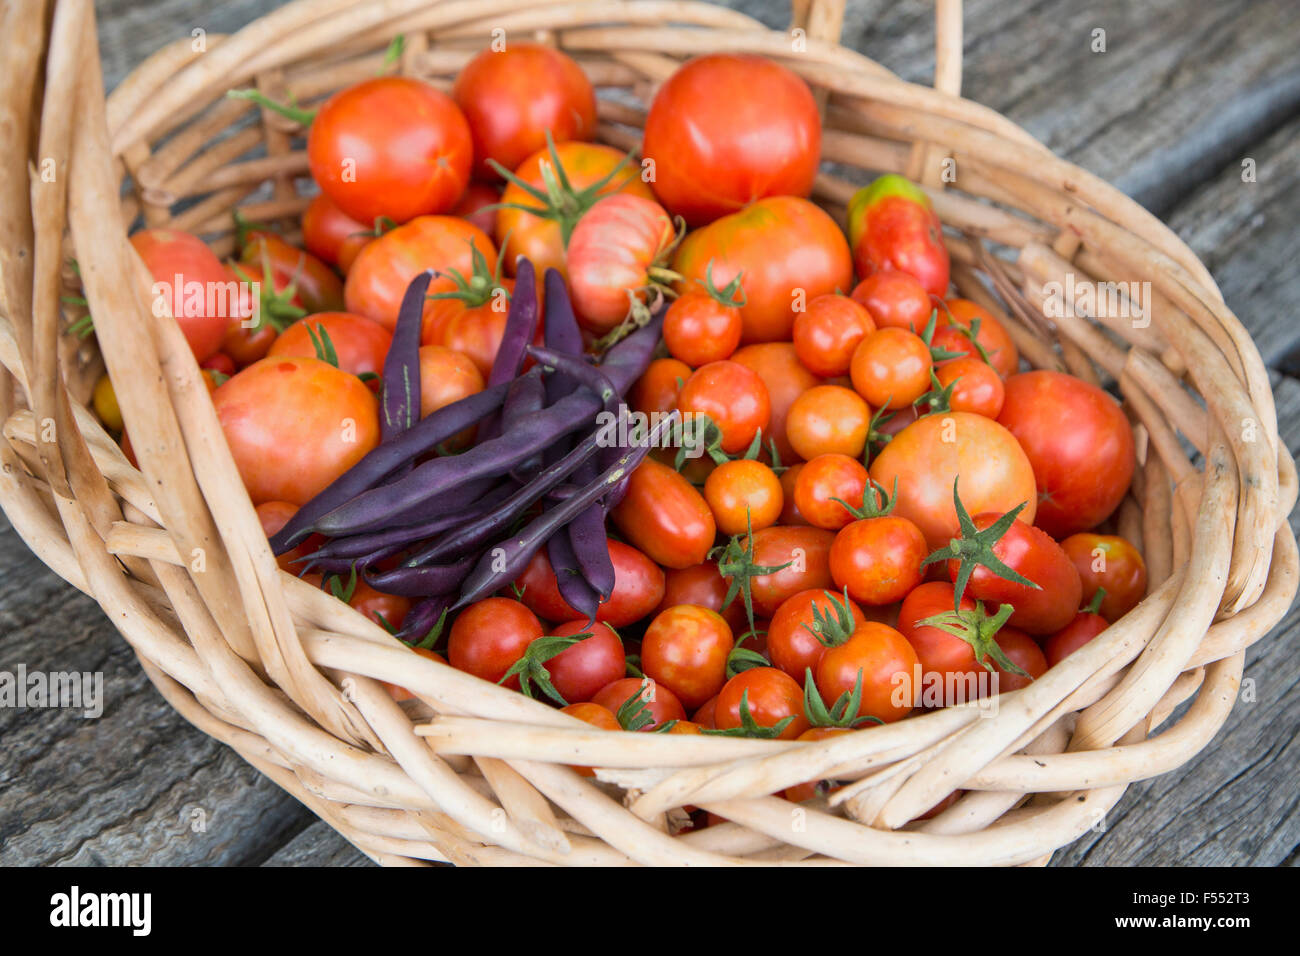 High angle view of fresh tomatoes and purple beans in wicker basket Stock Photo